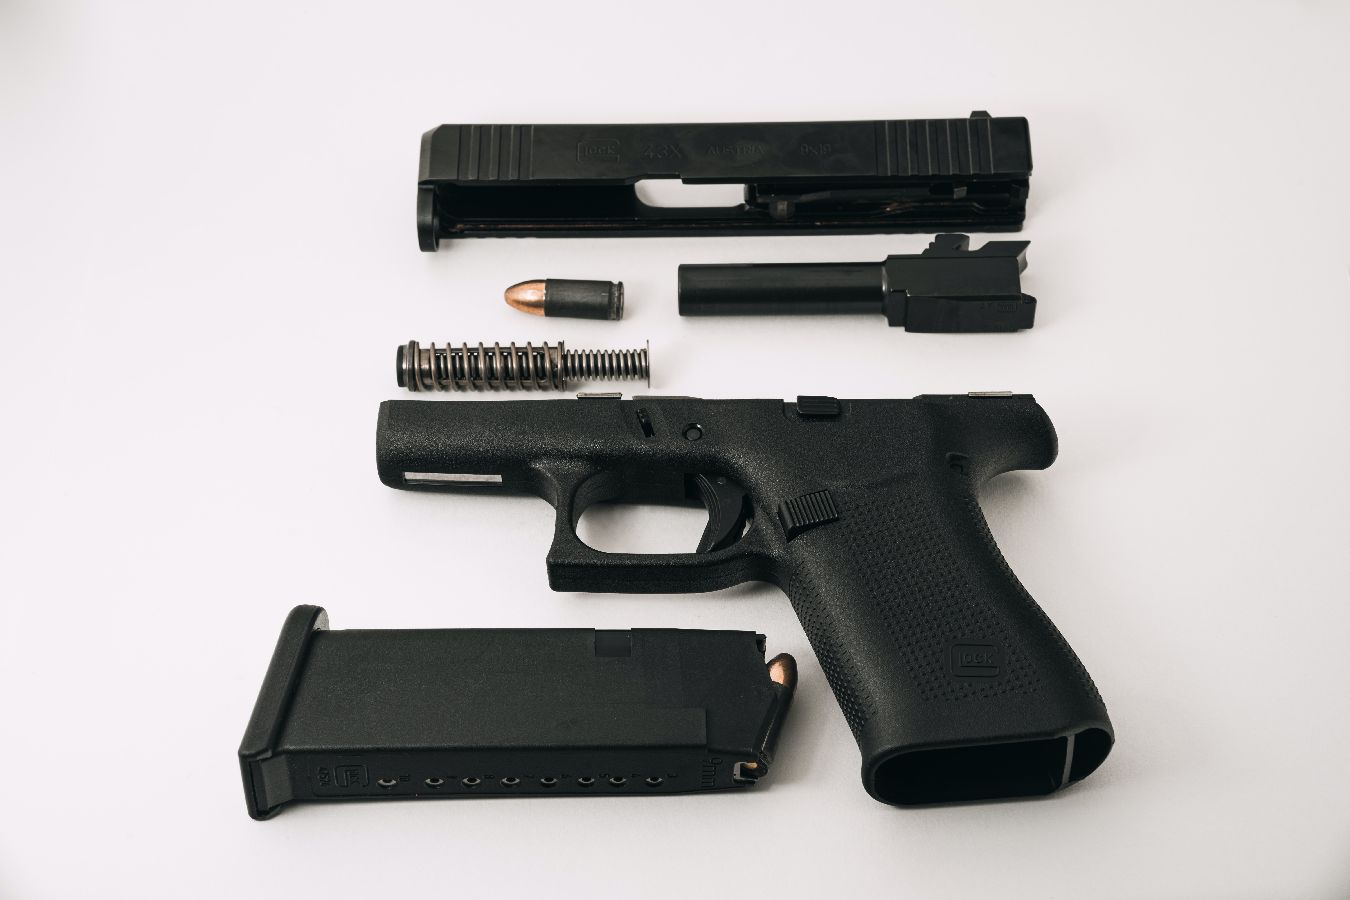 A black handgun with a magazine and other parts on a white background.